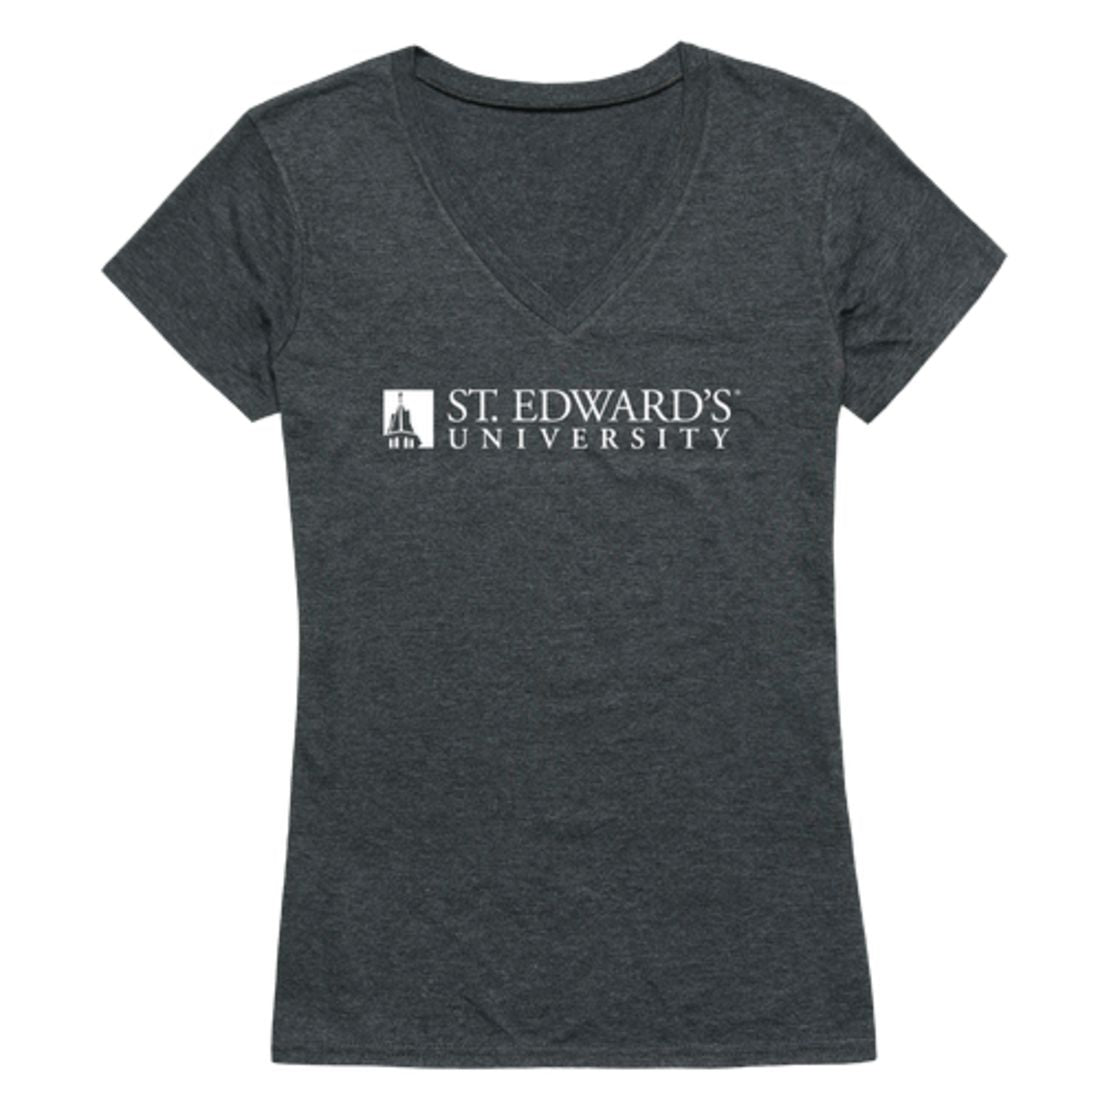 St. Edward's University Hilltoppers Womens Institutional T-Shirt Tee